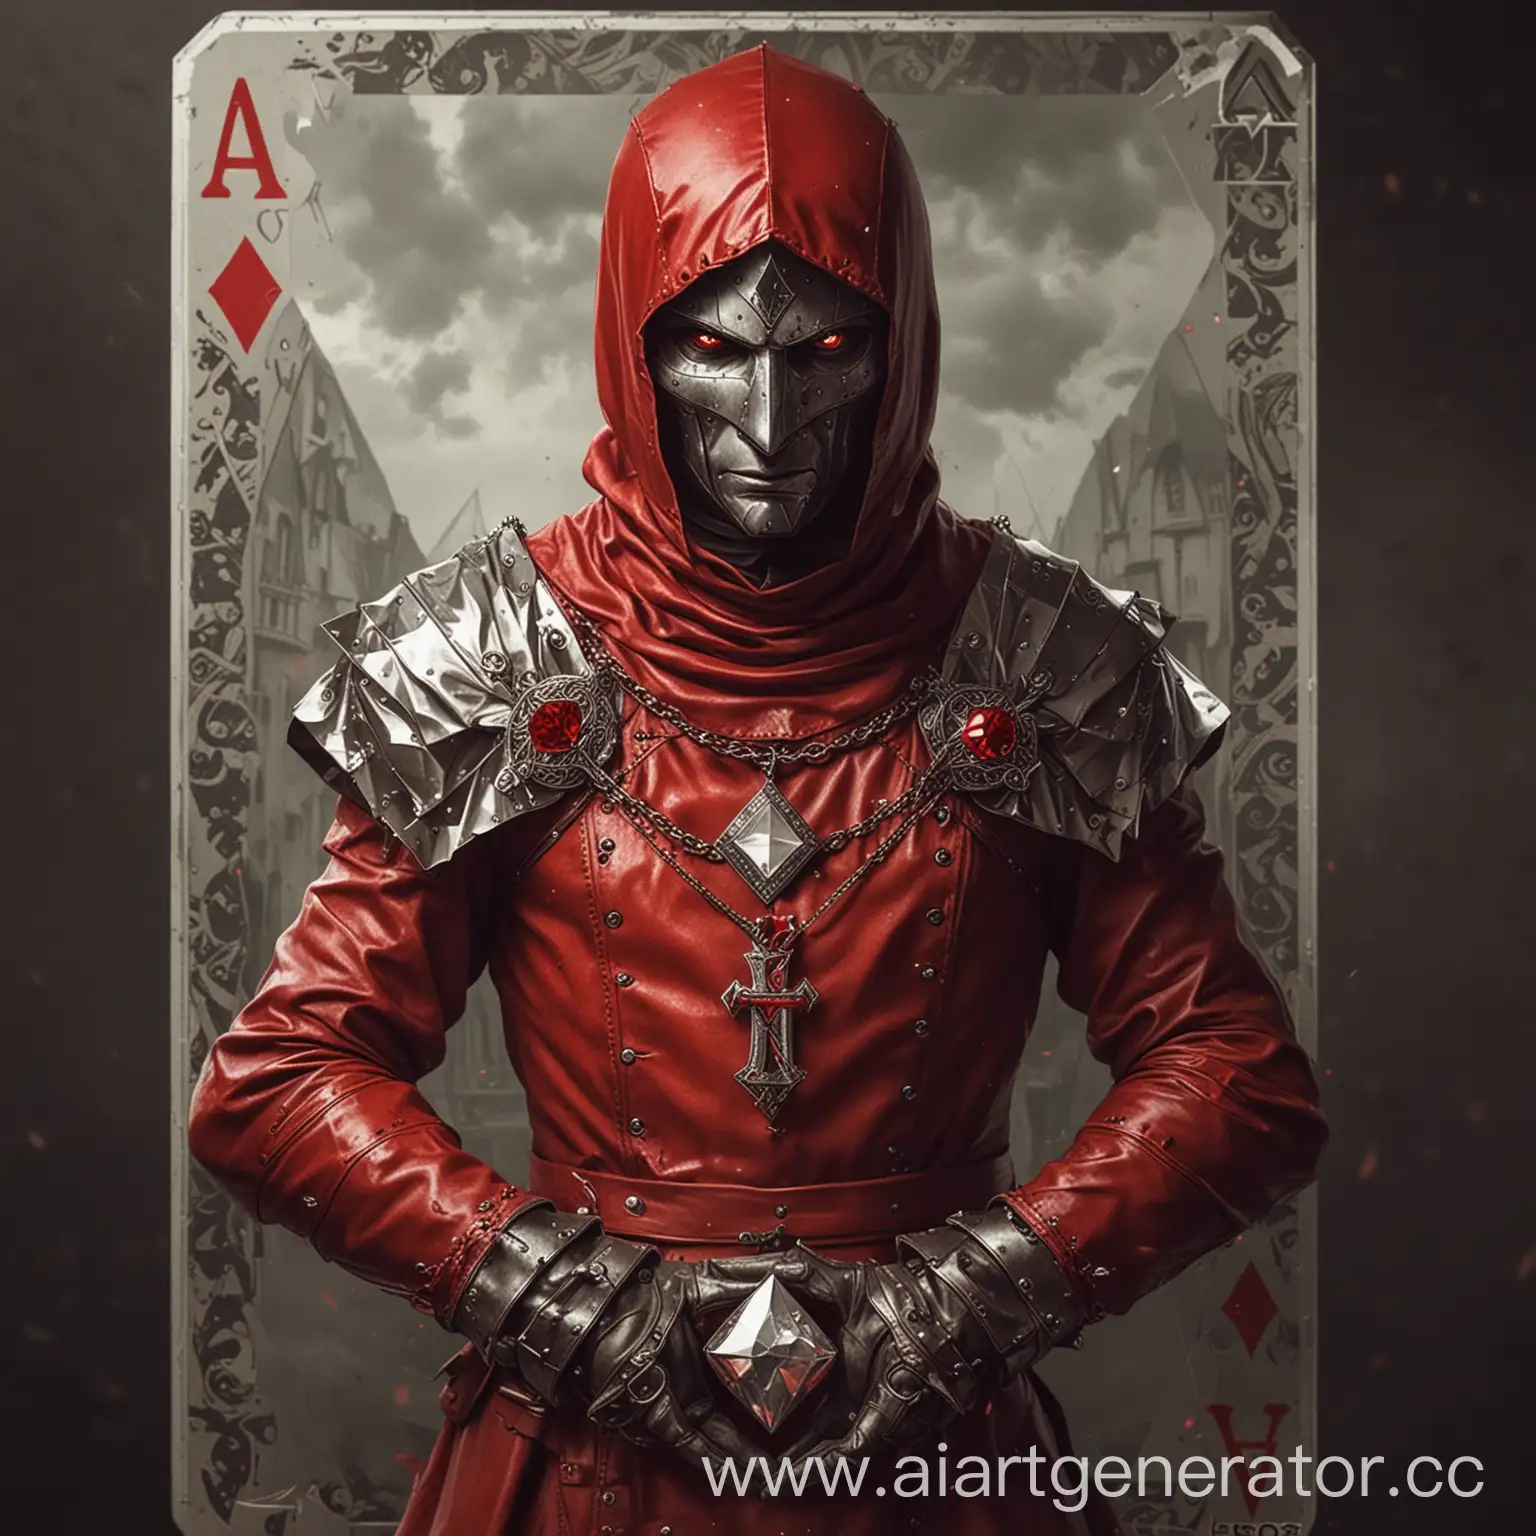 Scarlet-Knight-Holding-Ace-of-Diamonds-in-Medieval-Fantasy-Setting